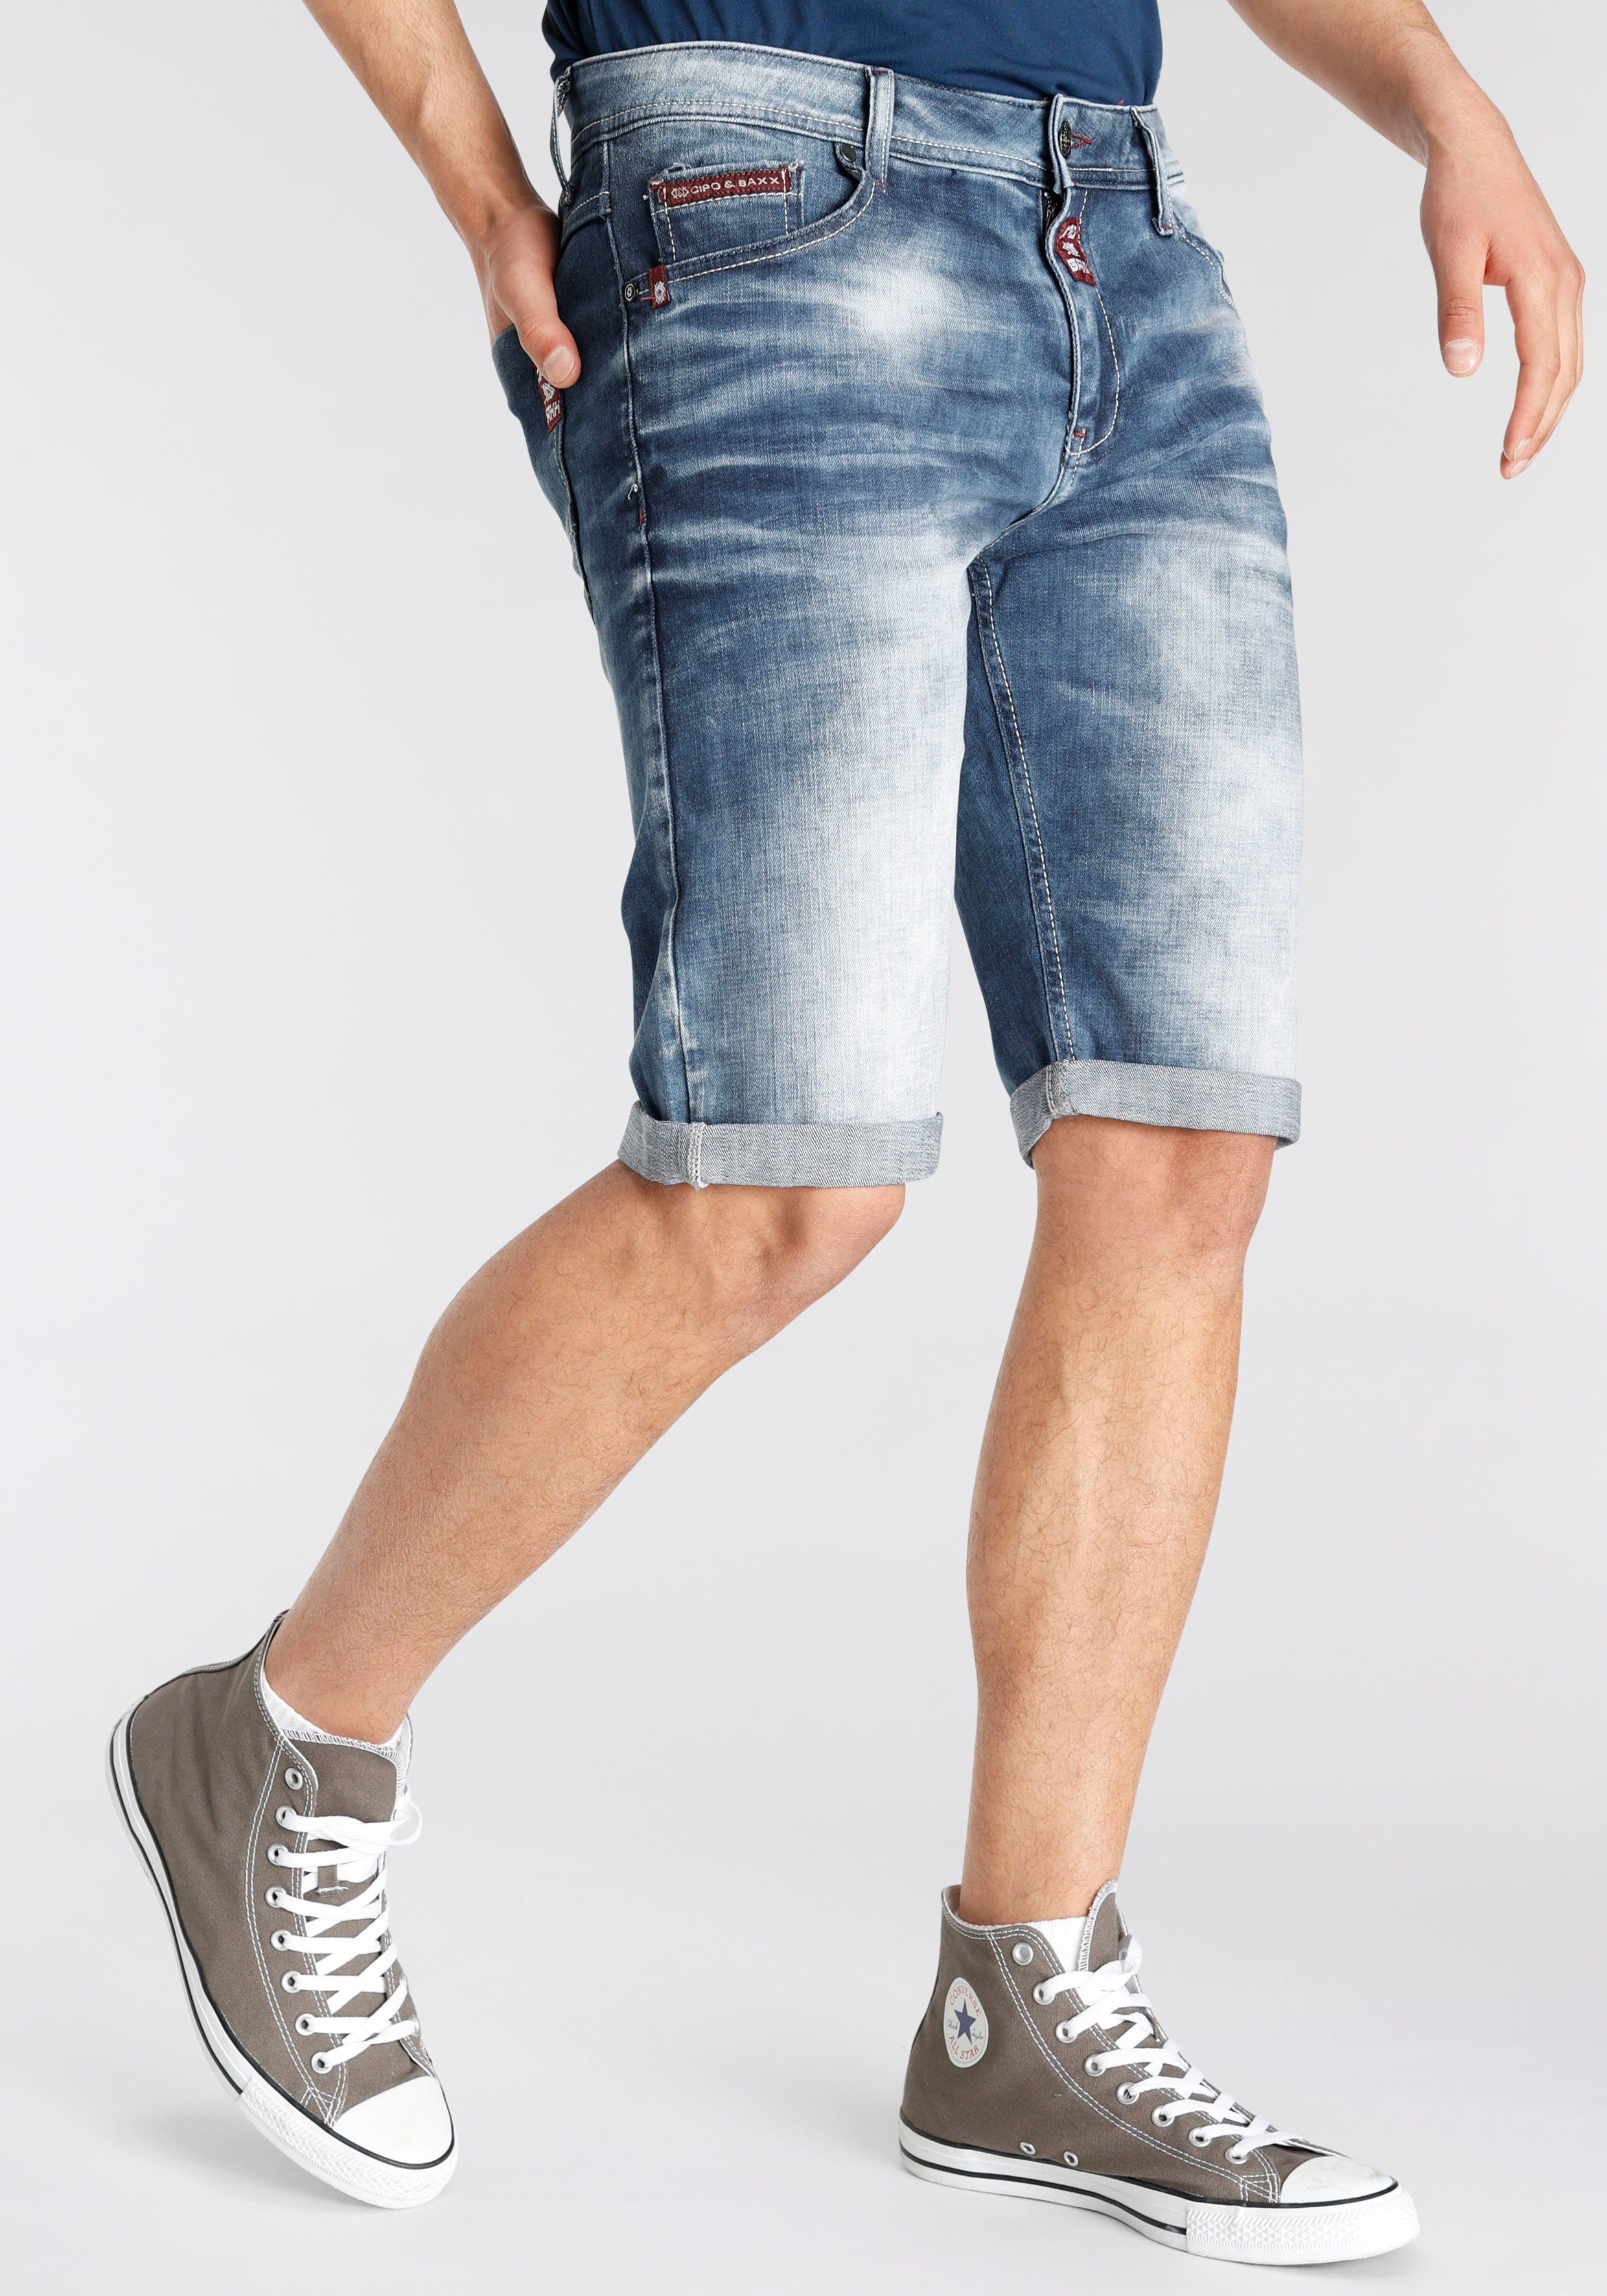 & used Jeansshorts Baxx Cipo blue